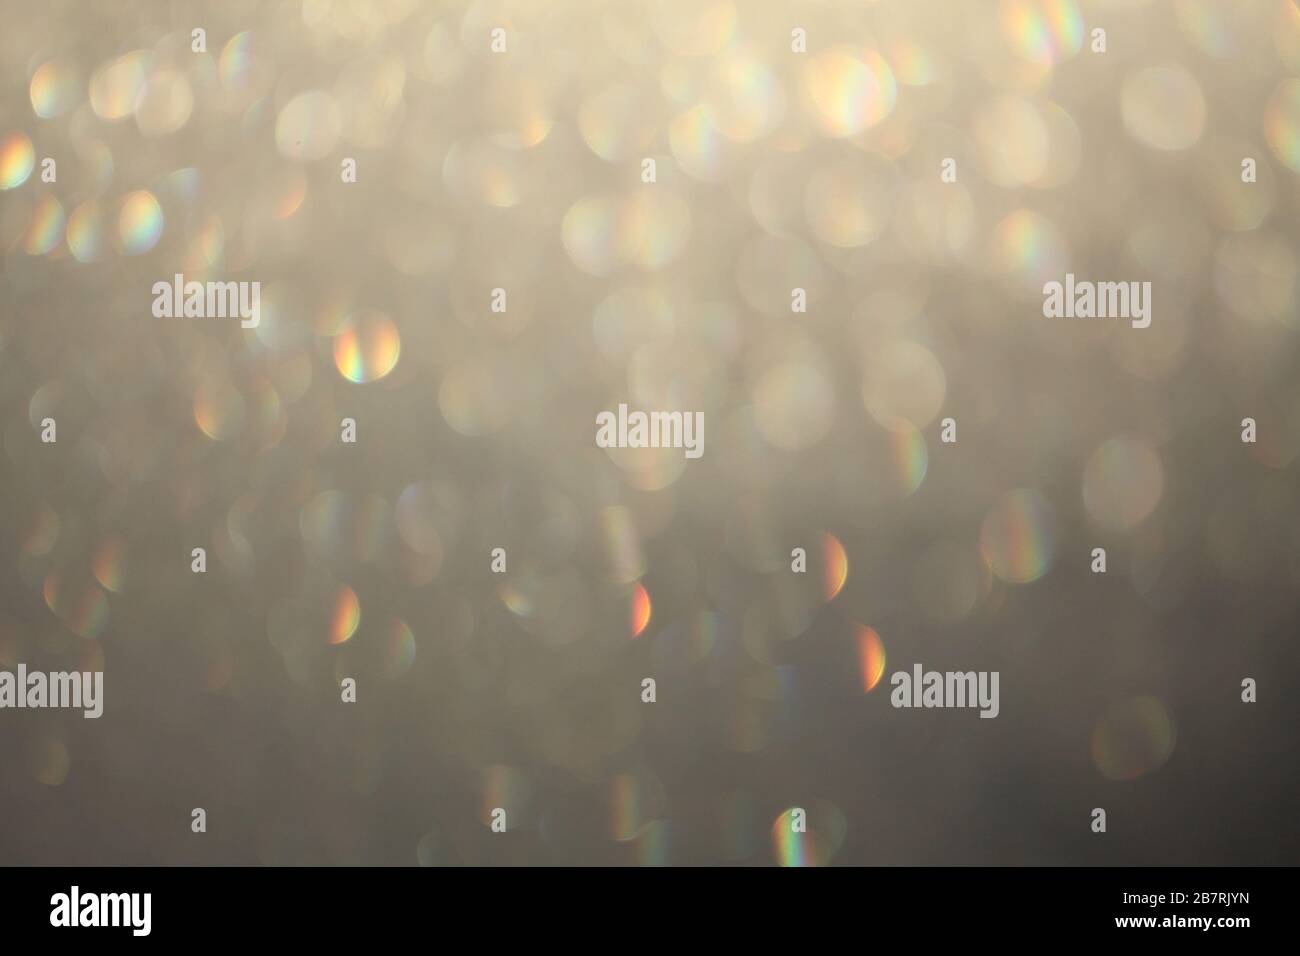 Abstract Bright Backdrop On Soft Light Background Blur Blank Space Wallpaper Soft Focus Blurred Defocused Bright Glittering Lights Stock Photo Alamy